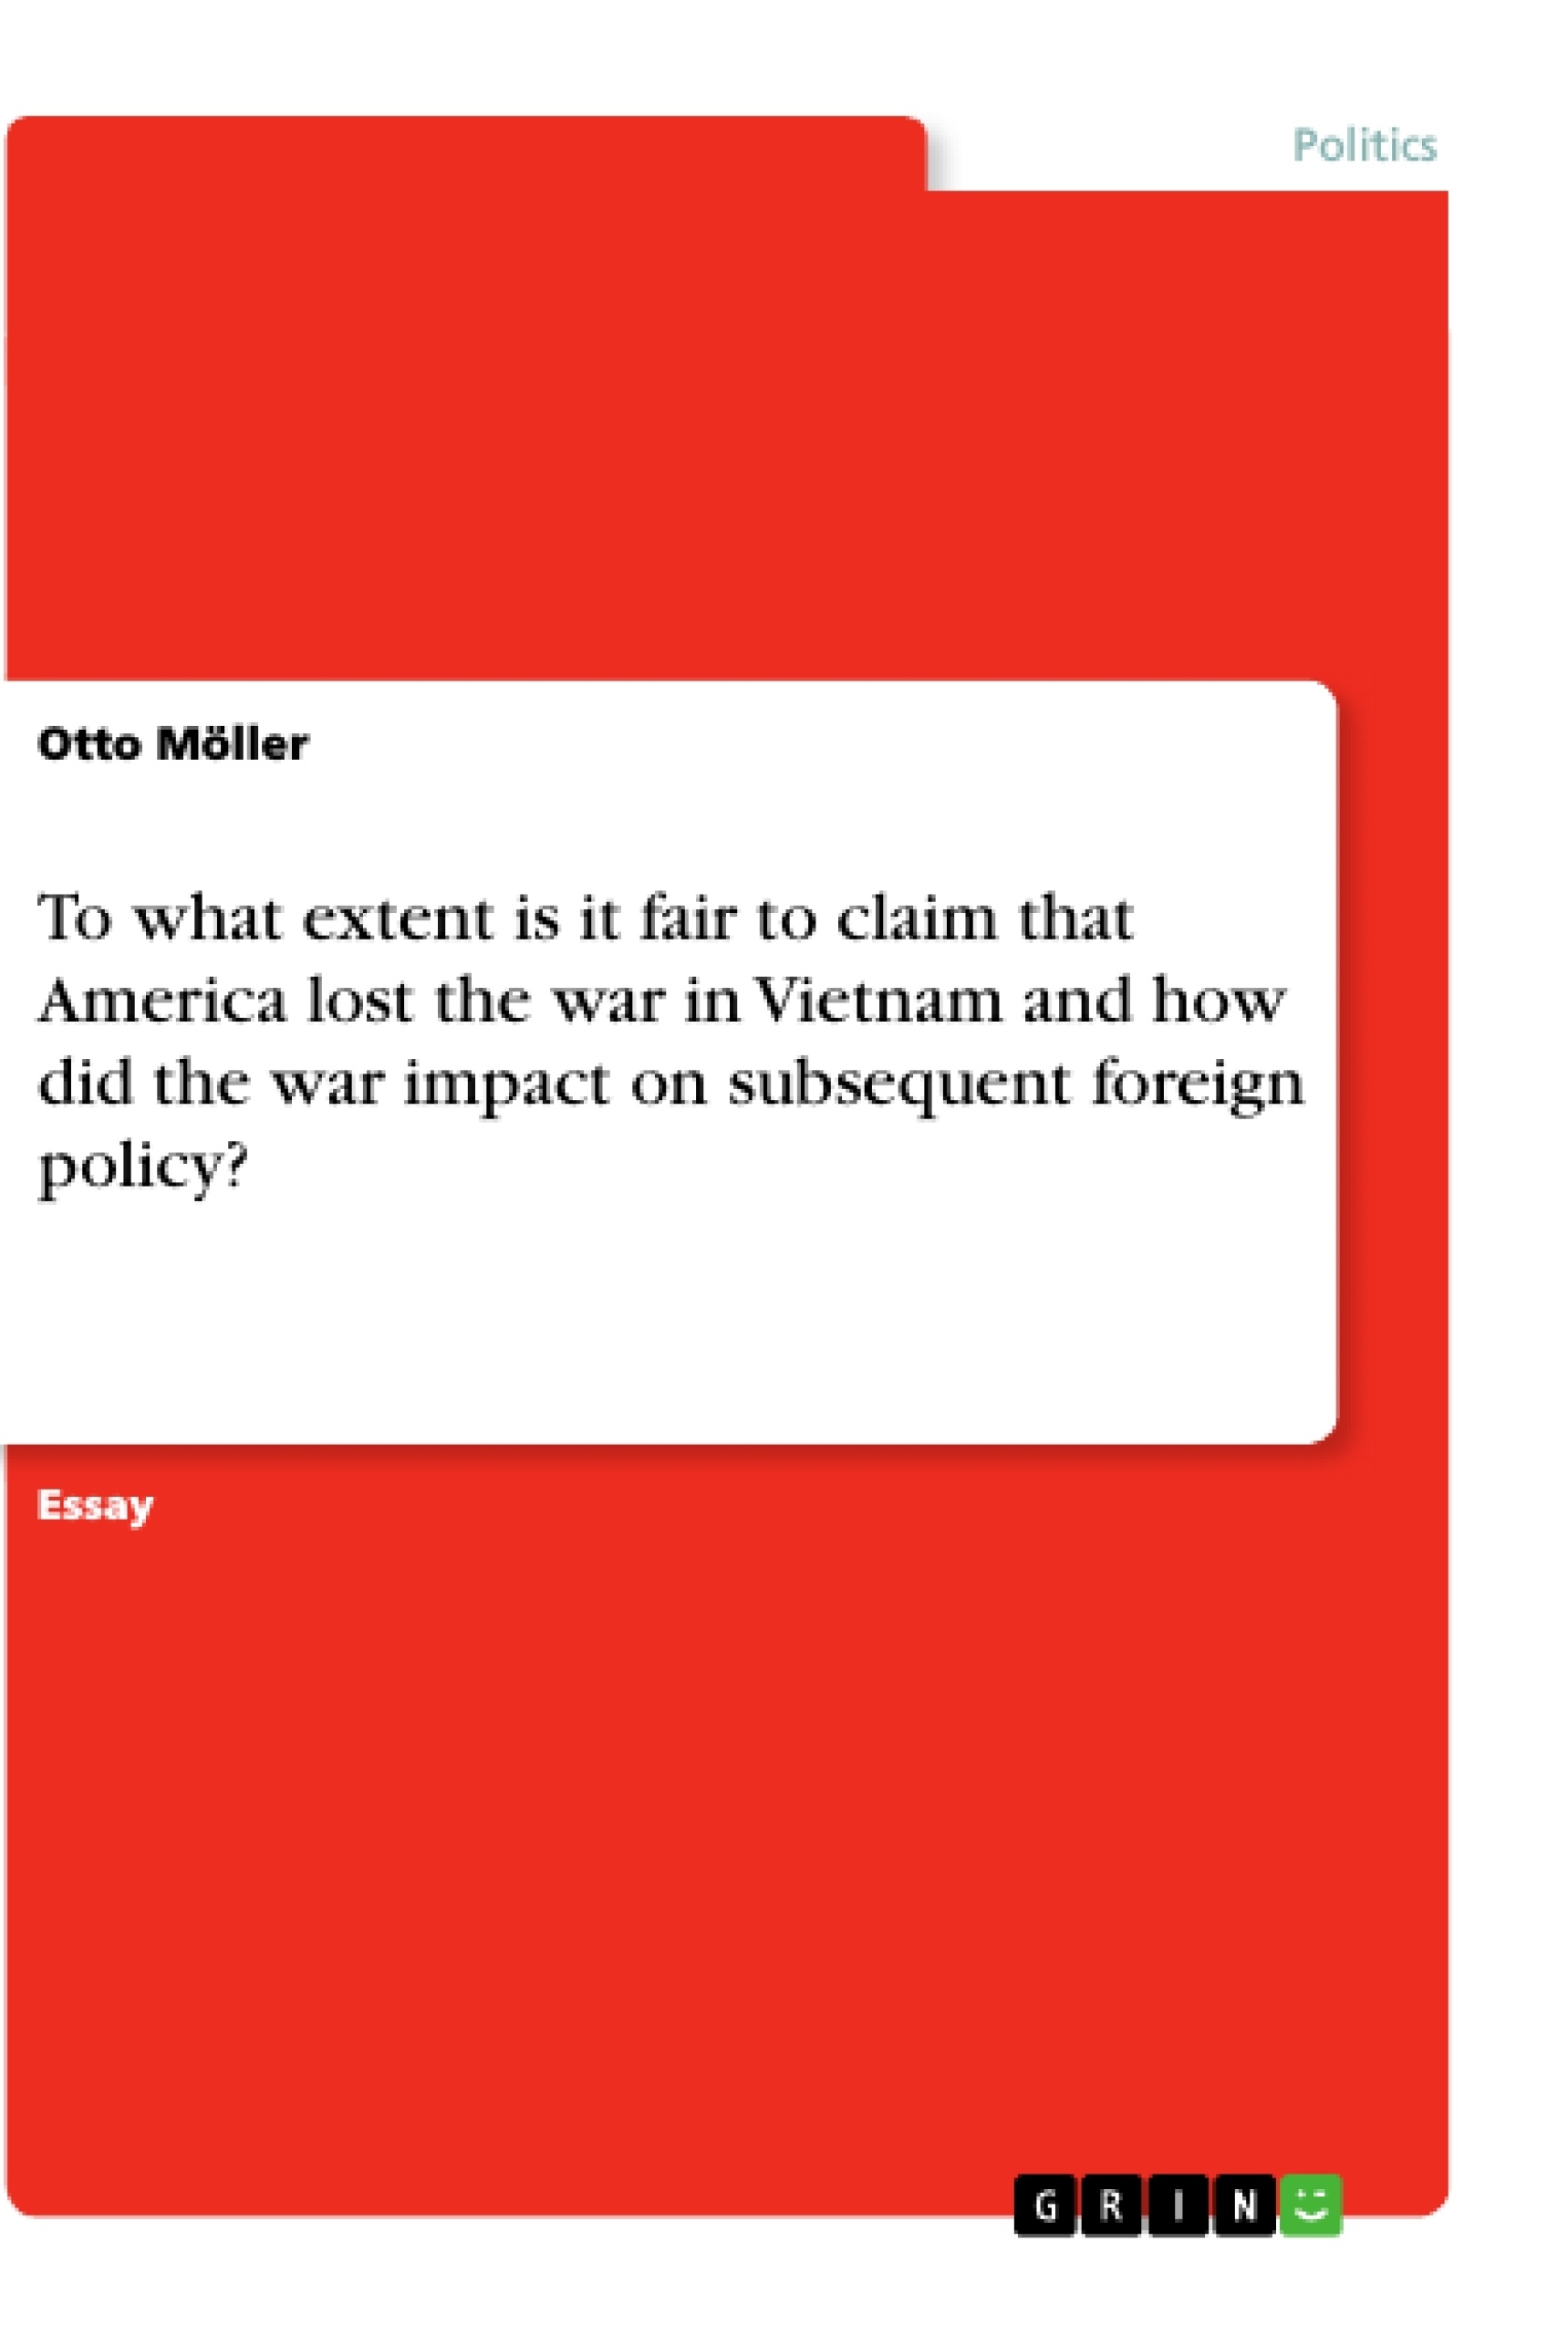 Título: To what extent is it fair to claim that America lost the war in Vietnam and how did the war impact on subsequent foreign policy?